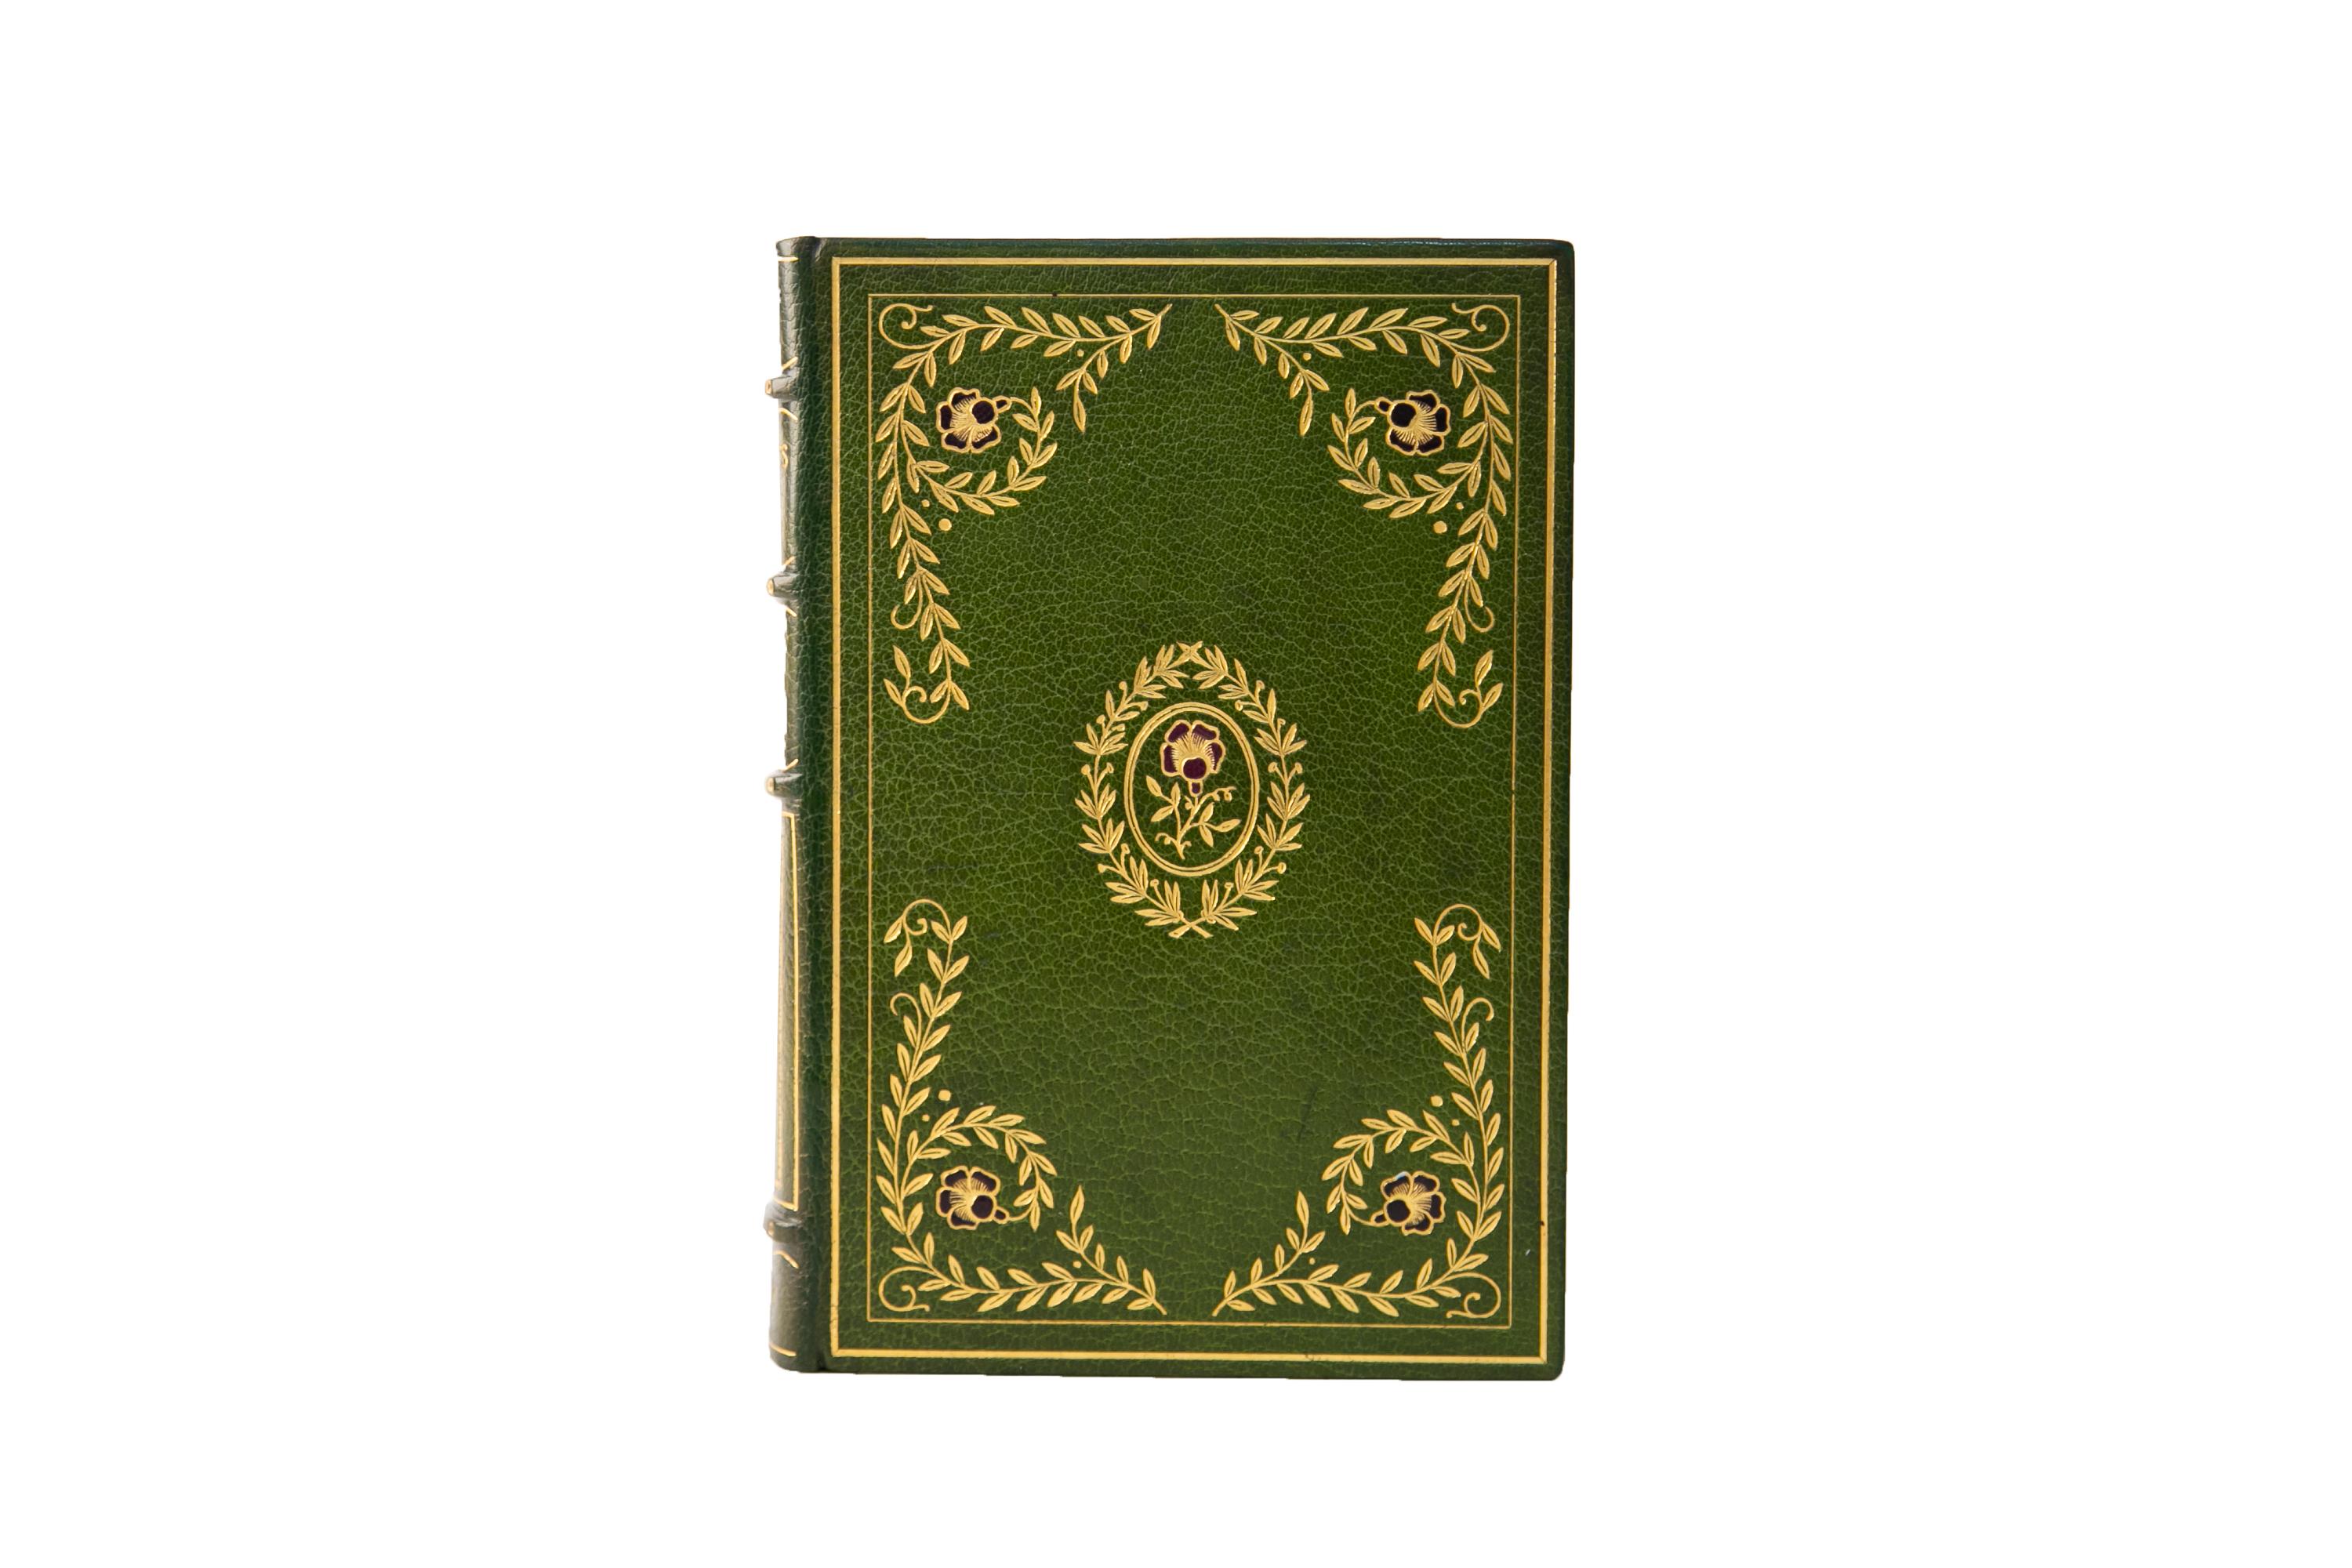 30 Volumes. William M. Thackeray, The Complete Works. Limited Edition. Bound in full green morocco with covers displaying bordering and ornate floral detailing in gilt tooling, red, and brown morocco inlay. Raised bands gilt with panels displaying